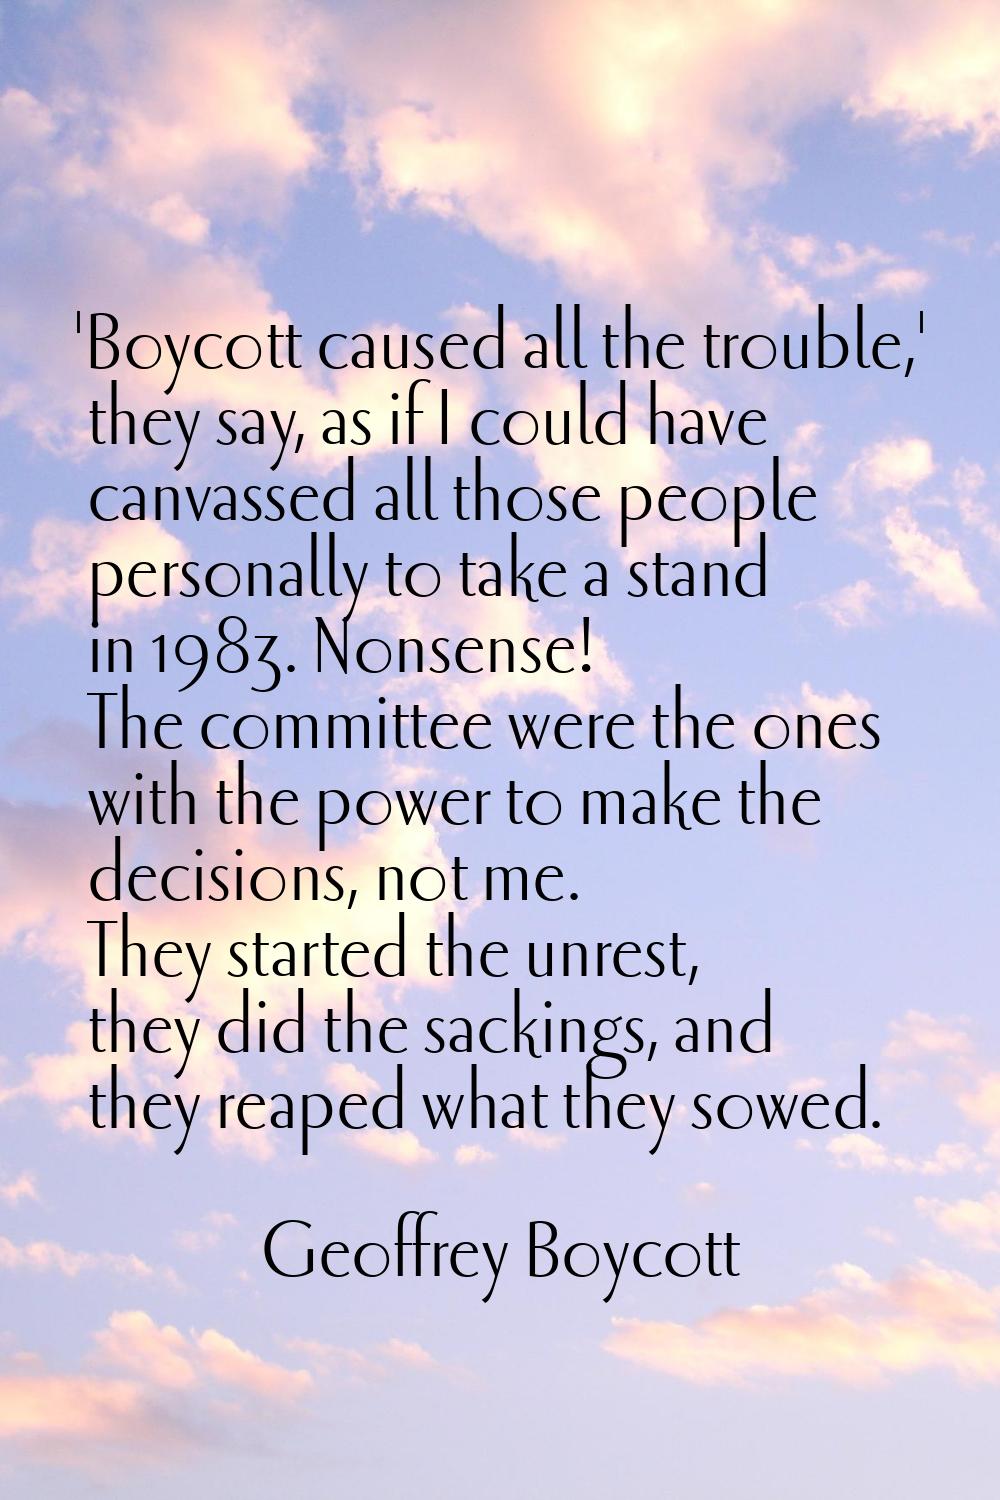 'Boycott caused all the trouble,' they say, as if I could have canvassed all those people personall